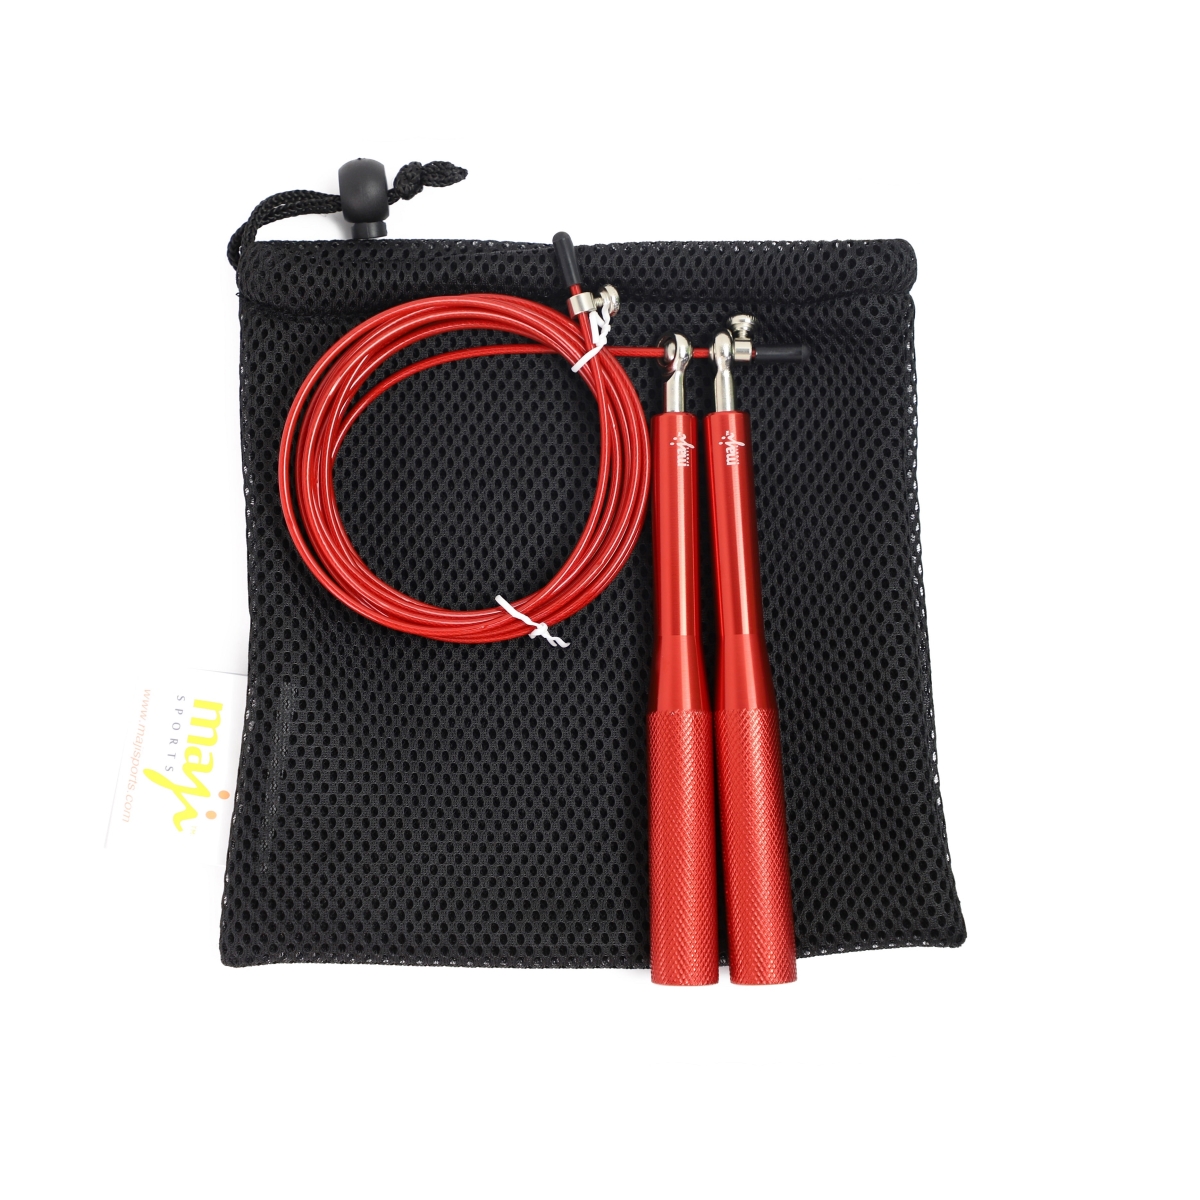 Picture of Maji Sports SZ11Red-MAJ High Speed Jump Rope with Aluminum Handles & Double Ball-Bearing System (SZ11Red-MAJ) Red